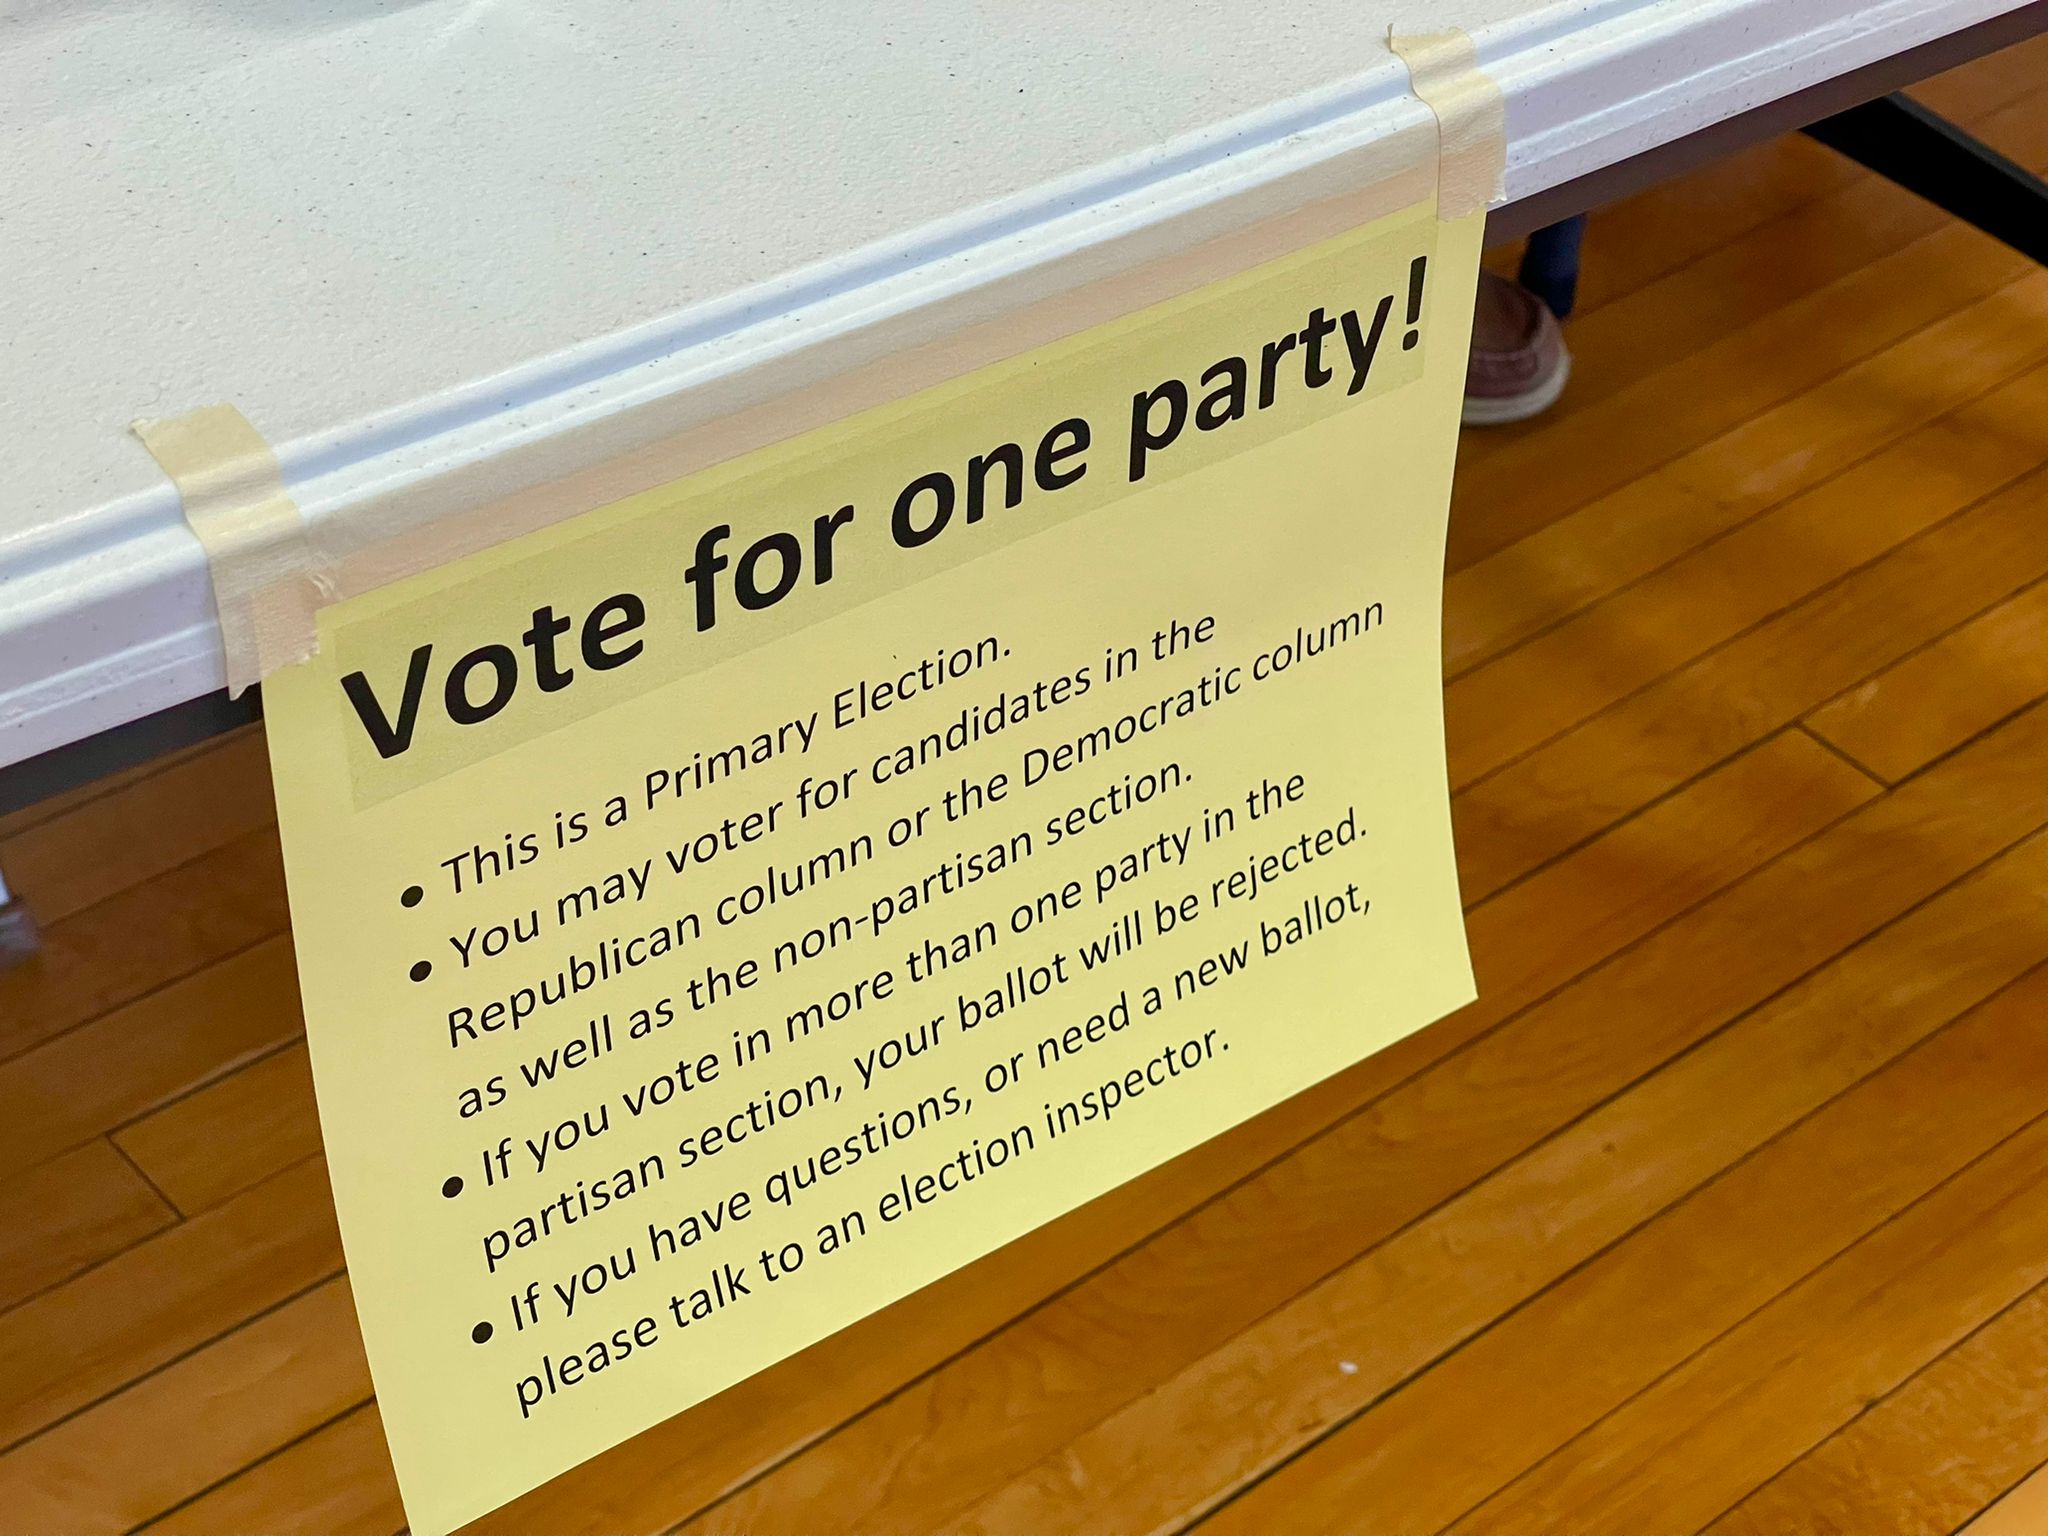 A sign at a Dearborn precinct instructs voters to "Vote for one party!"